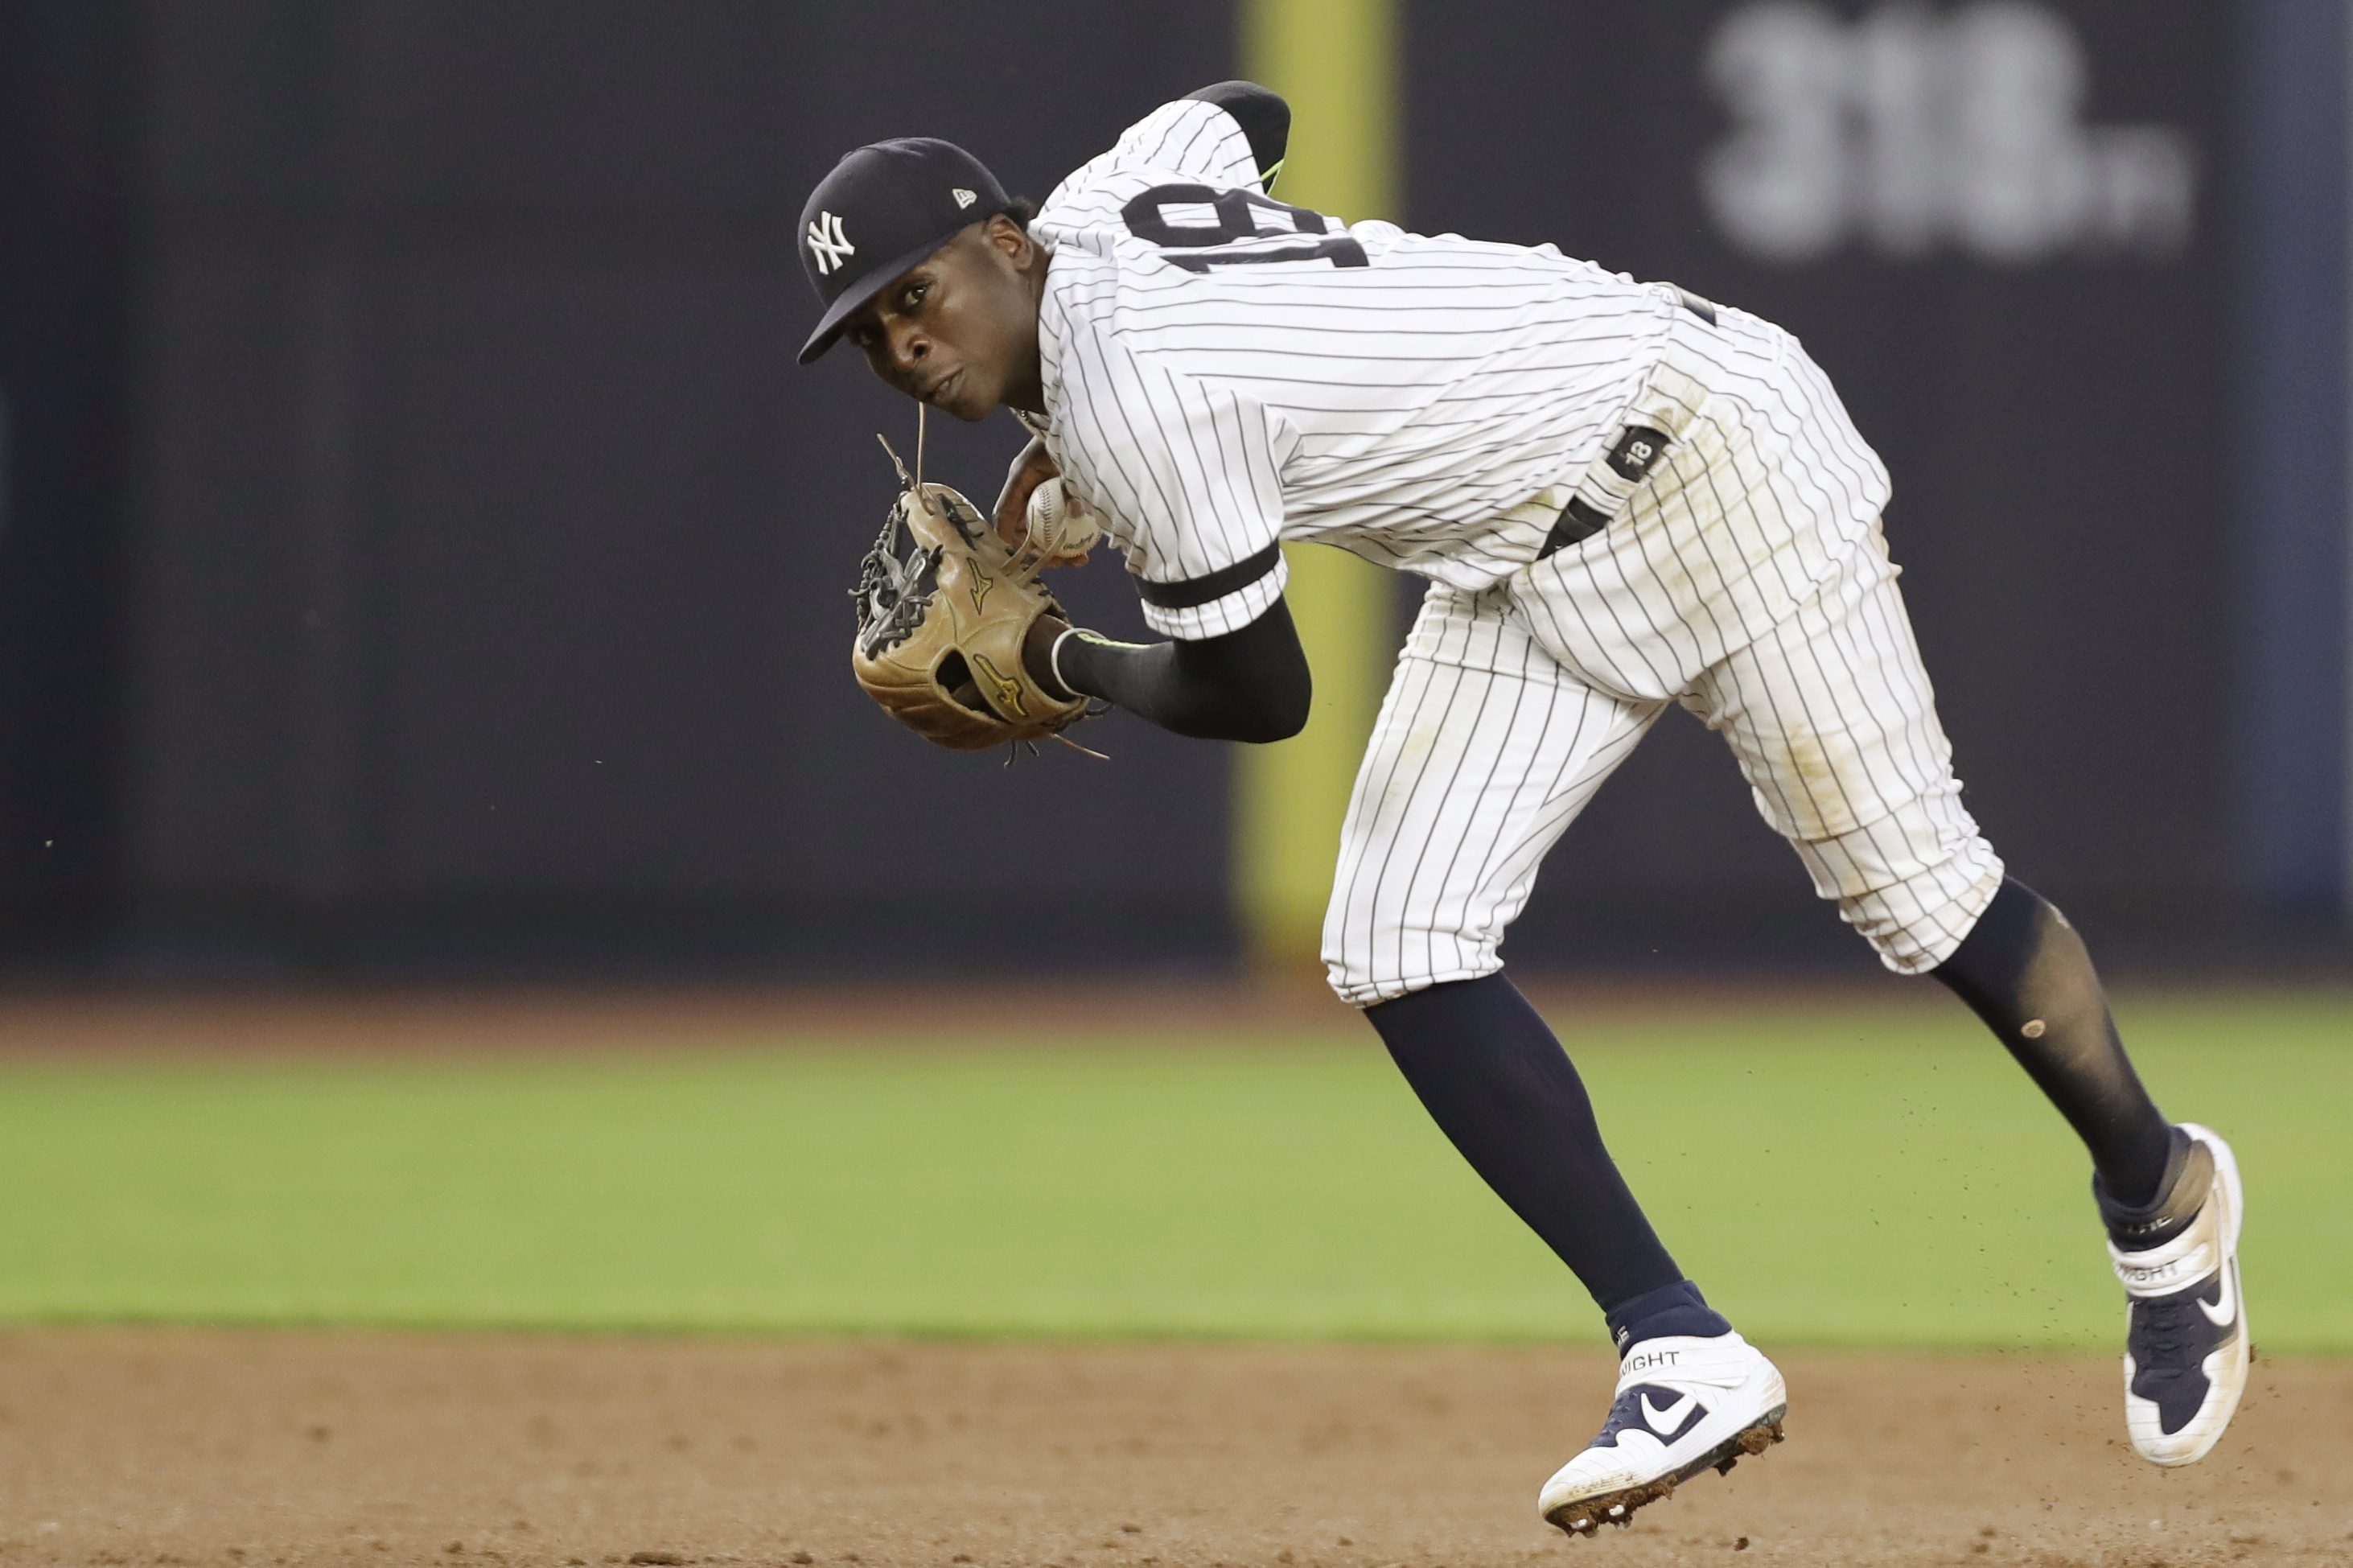 Didi Gregorius back with New York Yankees, cleared to for baseball